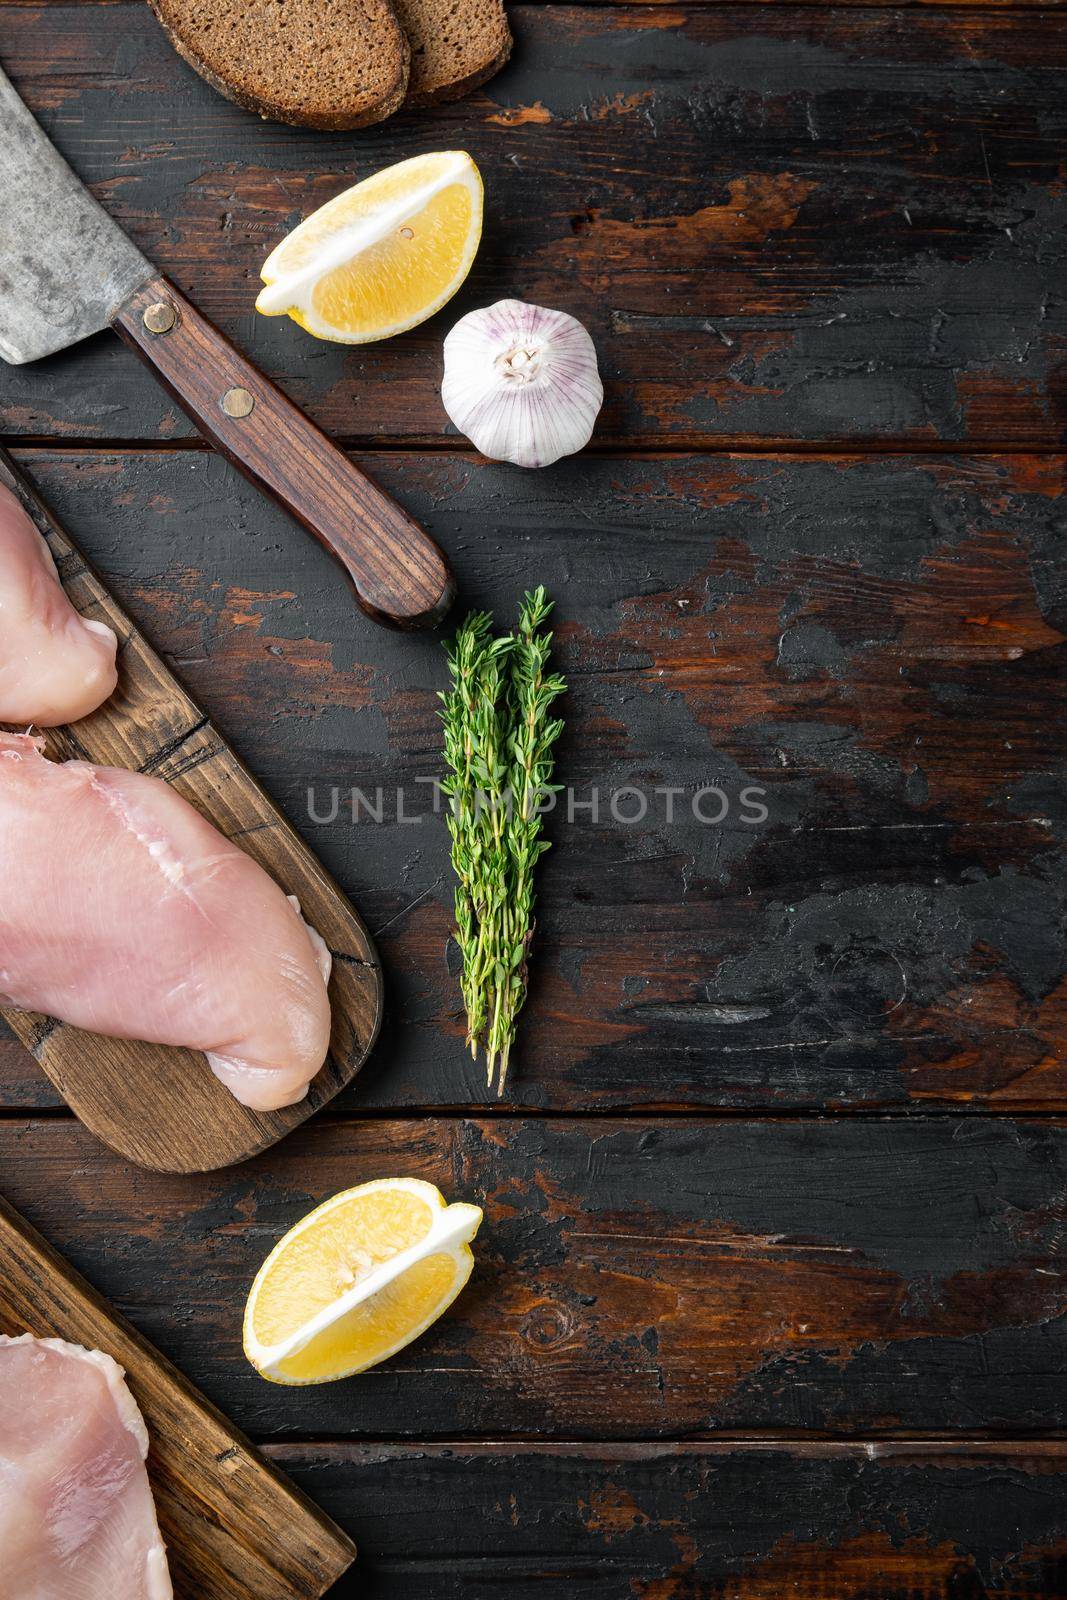 Crumbed uncooked chicken breast ingredient on dark wooden background, flat lay with space for text by Ilianesolenyi